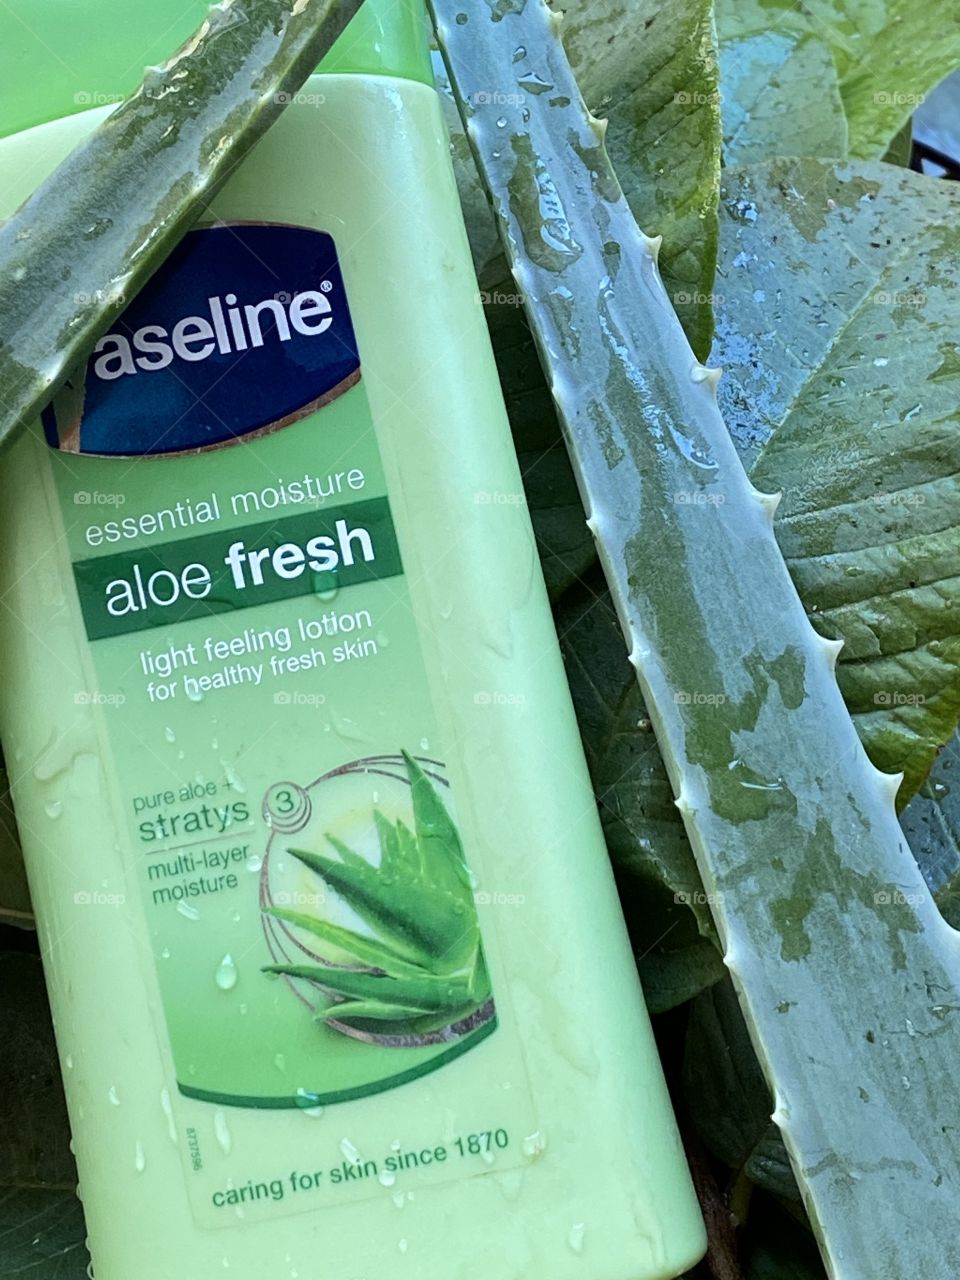 Skin care and nourishing with Vaseline lotion